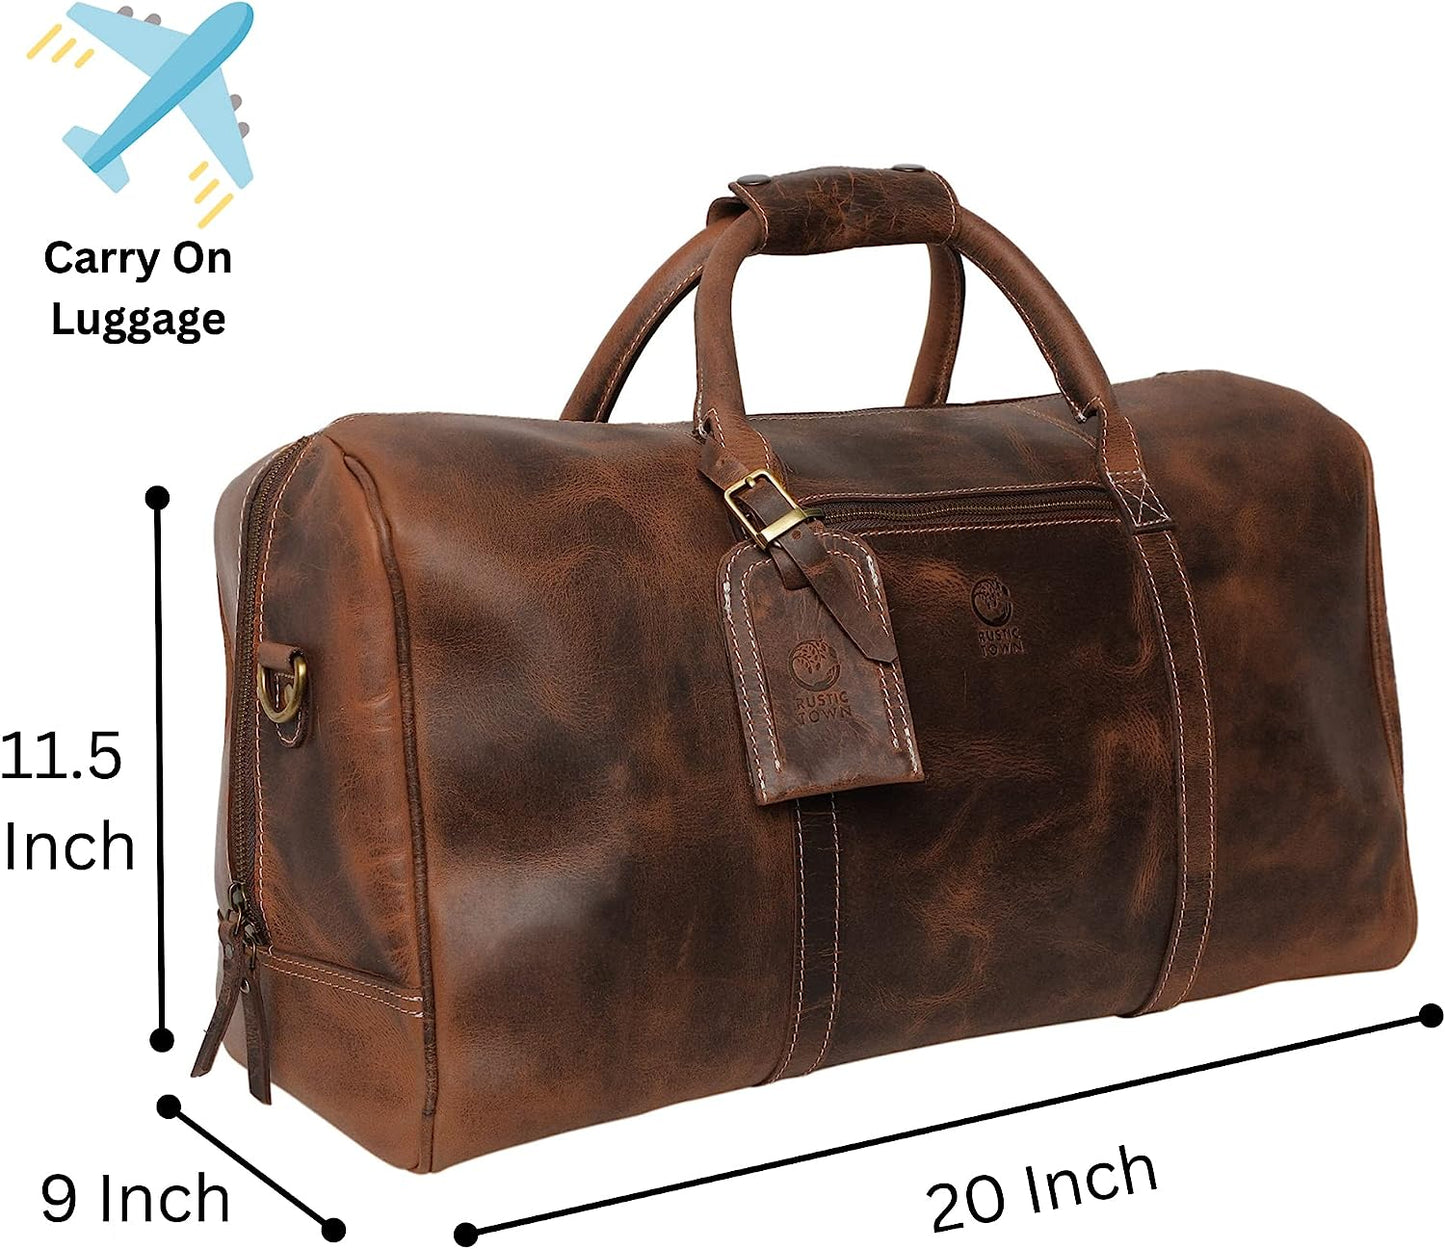 Handmade Leather Travel Duffel Bag - Airplane Underseat Carry On Bags by